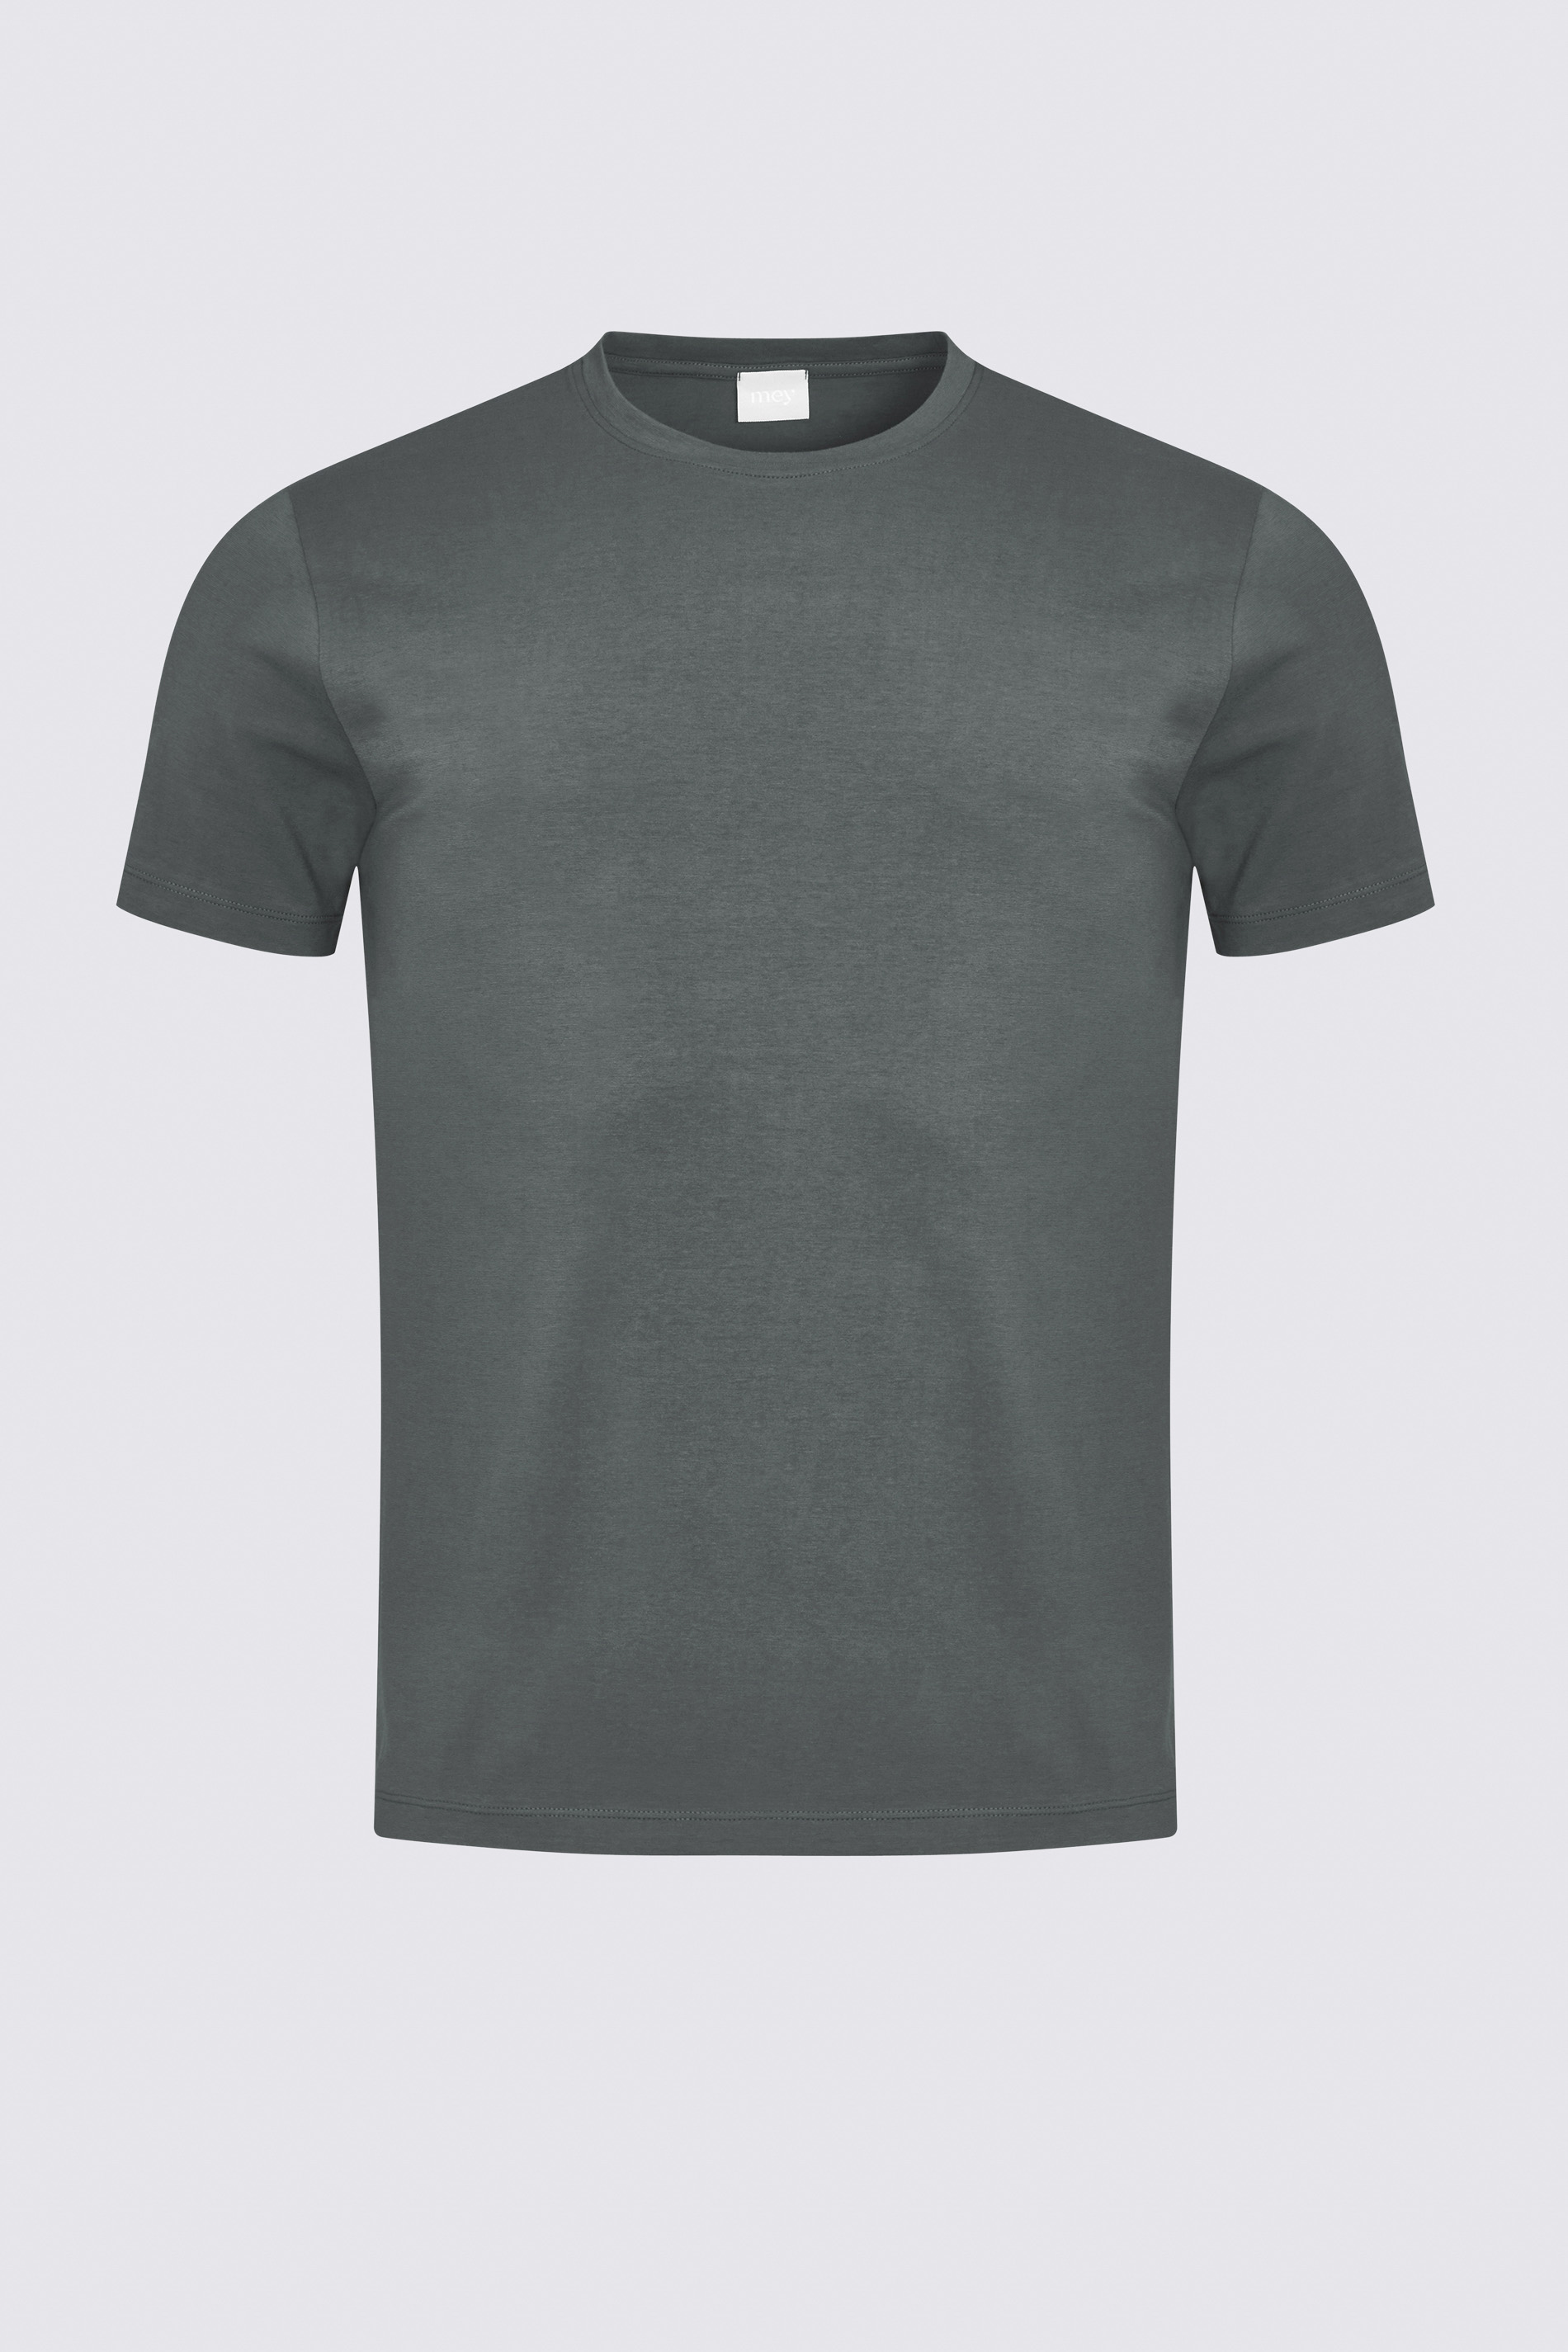 T-shirt Stormy Grey Serie Relax Uitknippen | mey®